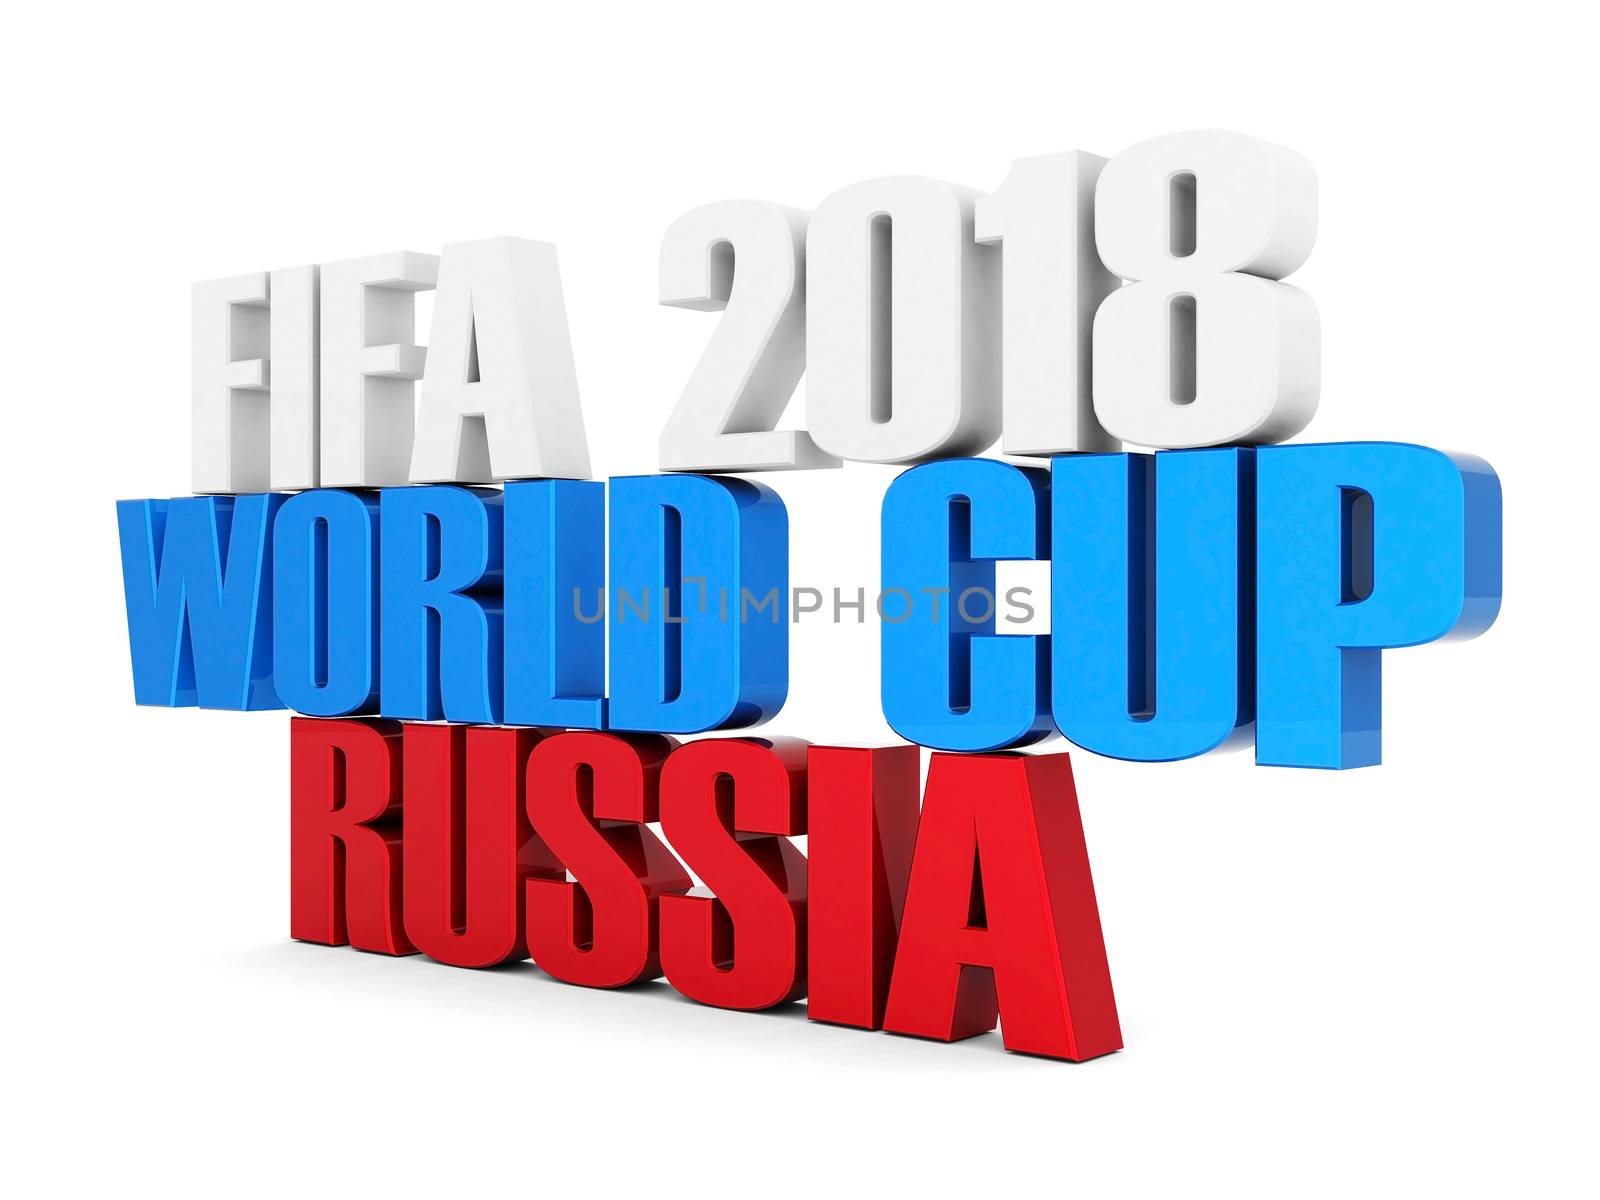 fifa world cup 2018 in Russia on a beautiful white background